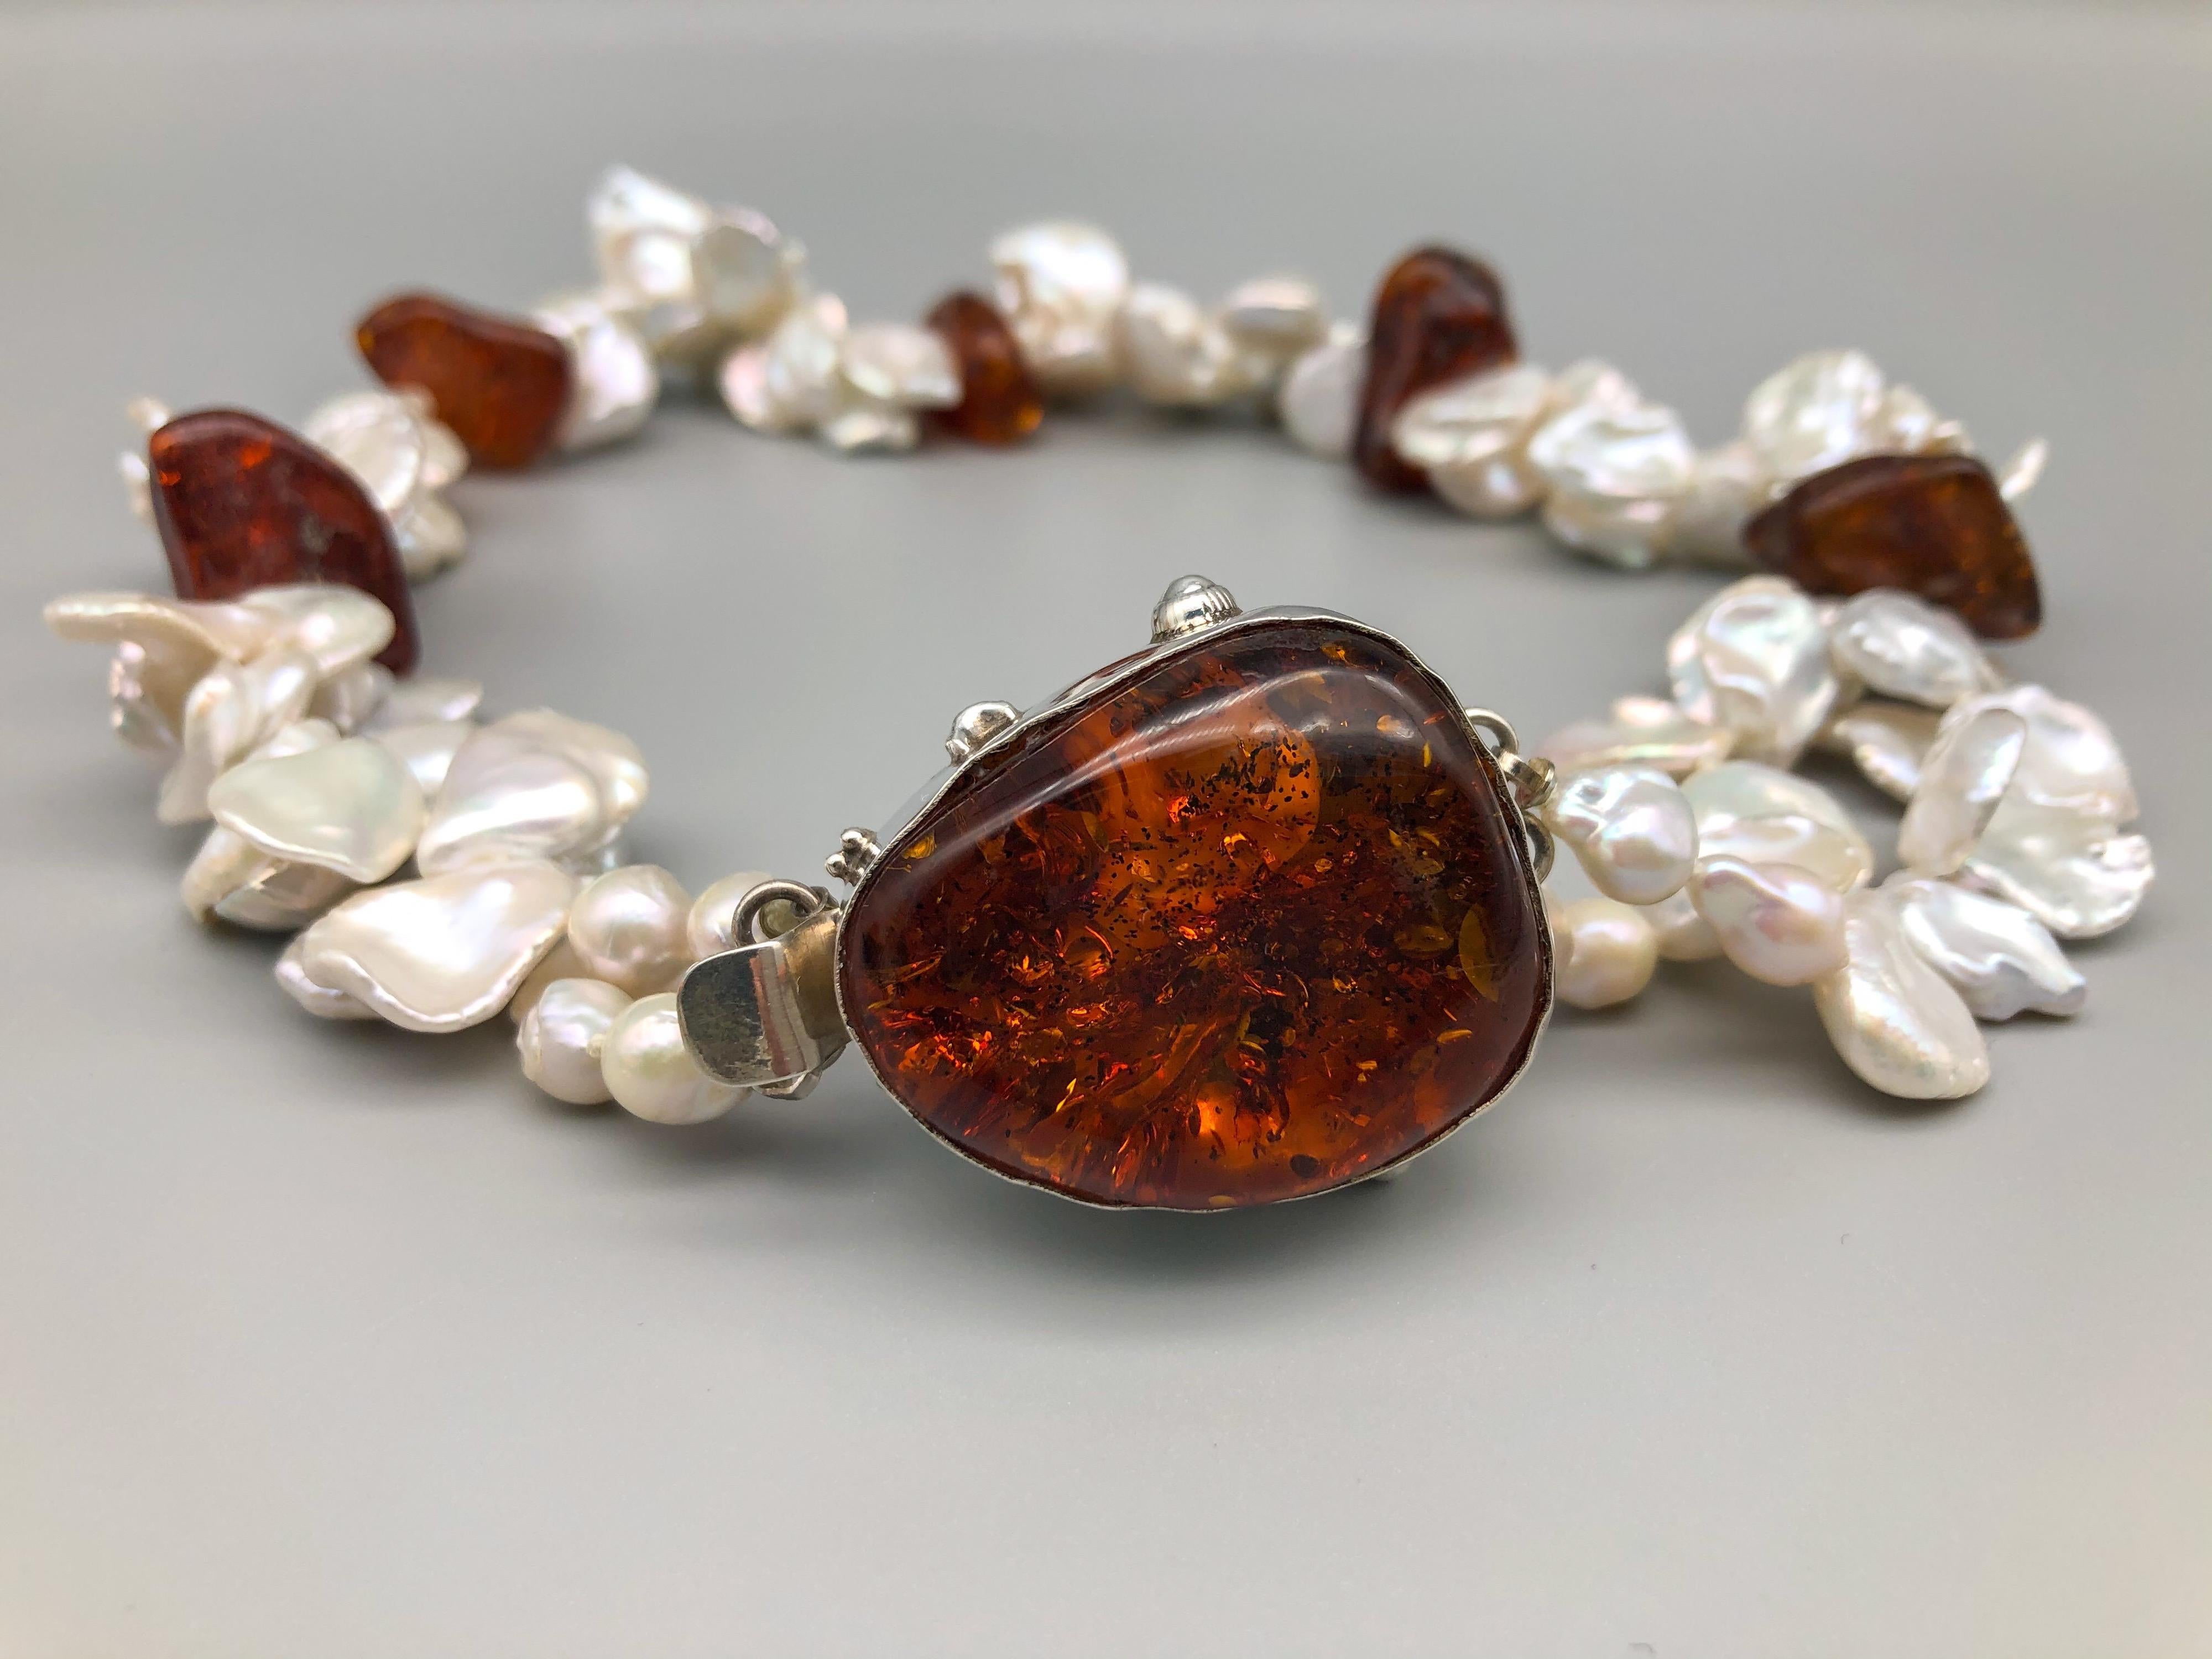 A.Jeschel Splendid Keshi Pearls and Amber Necklace. For Sale 3